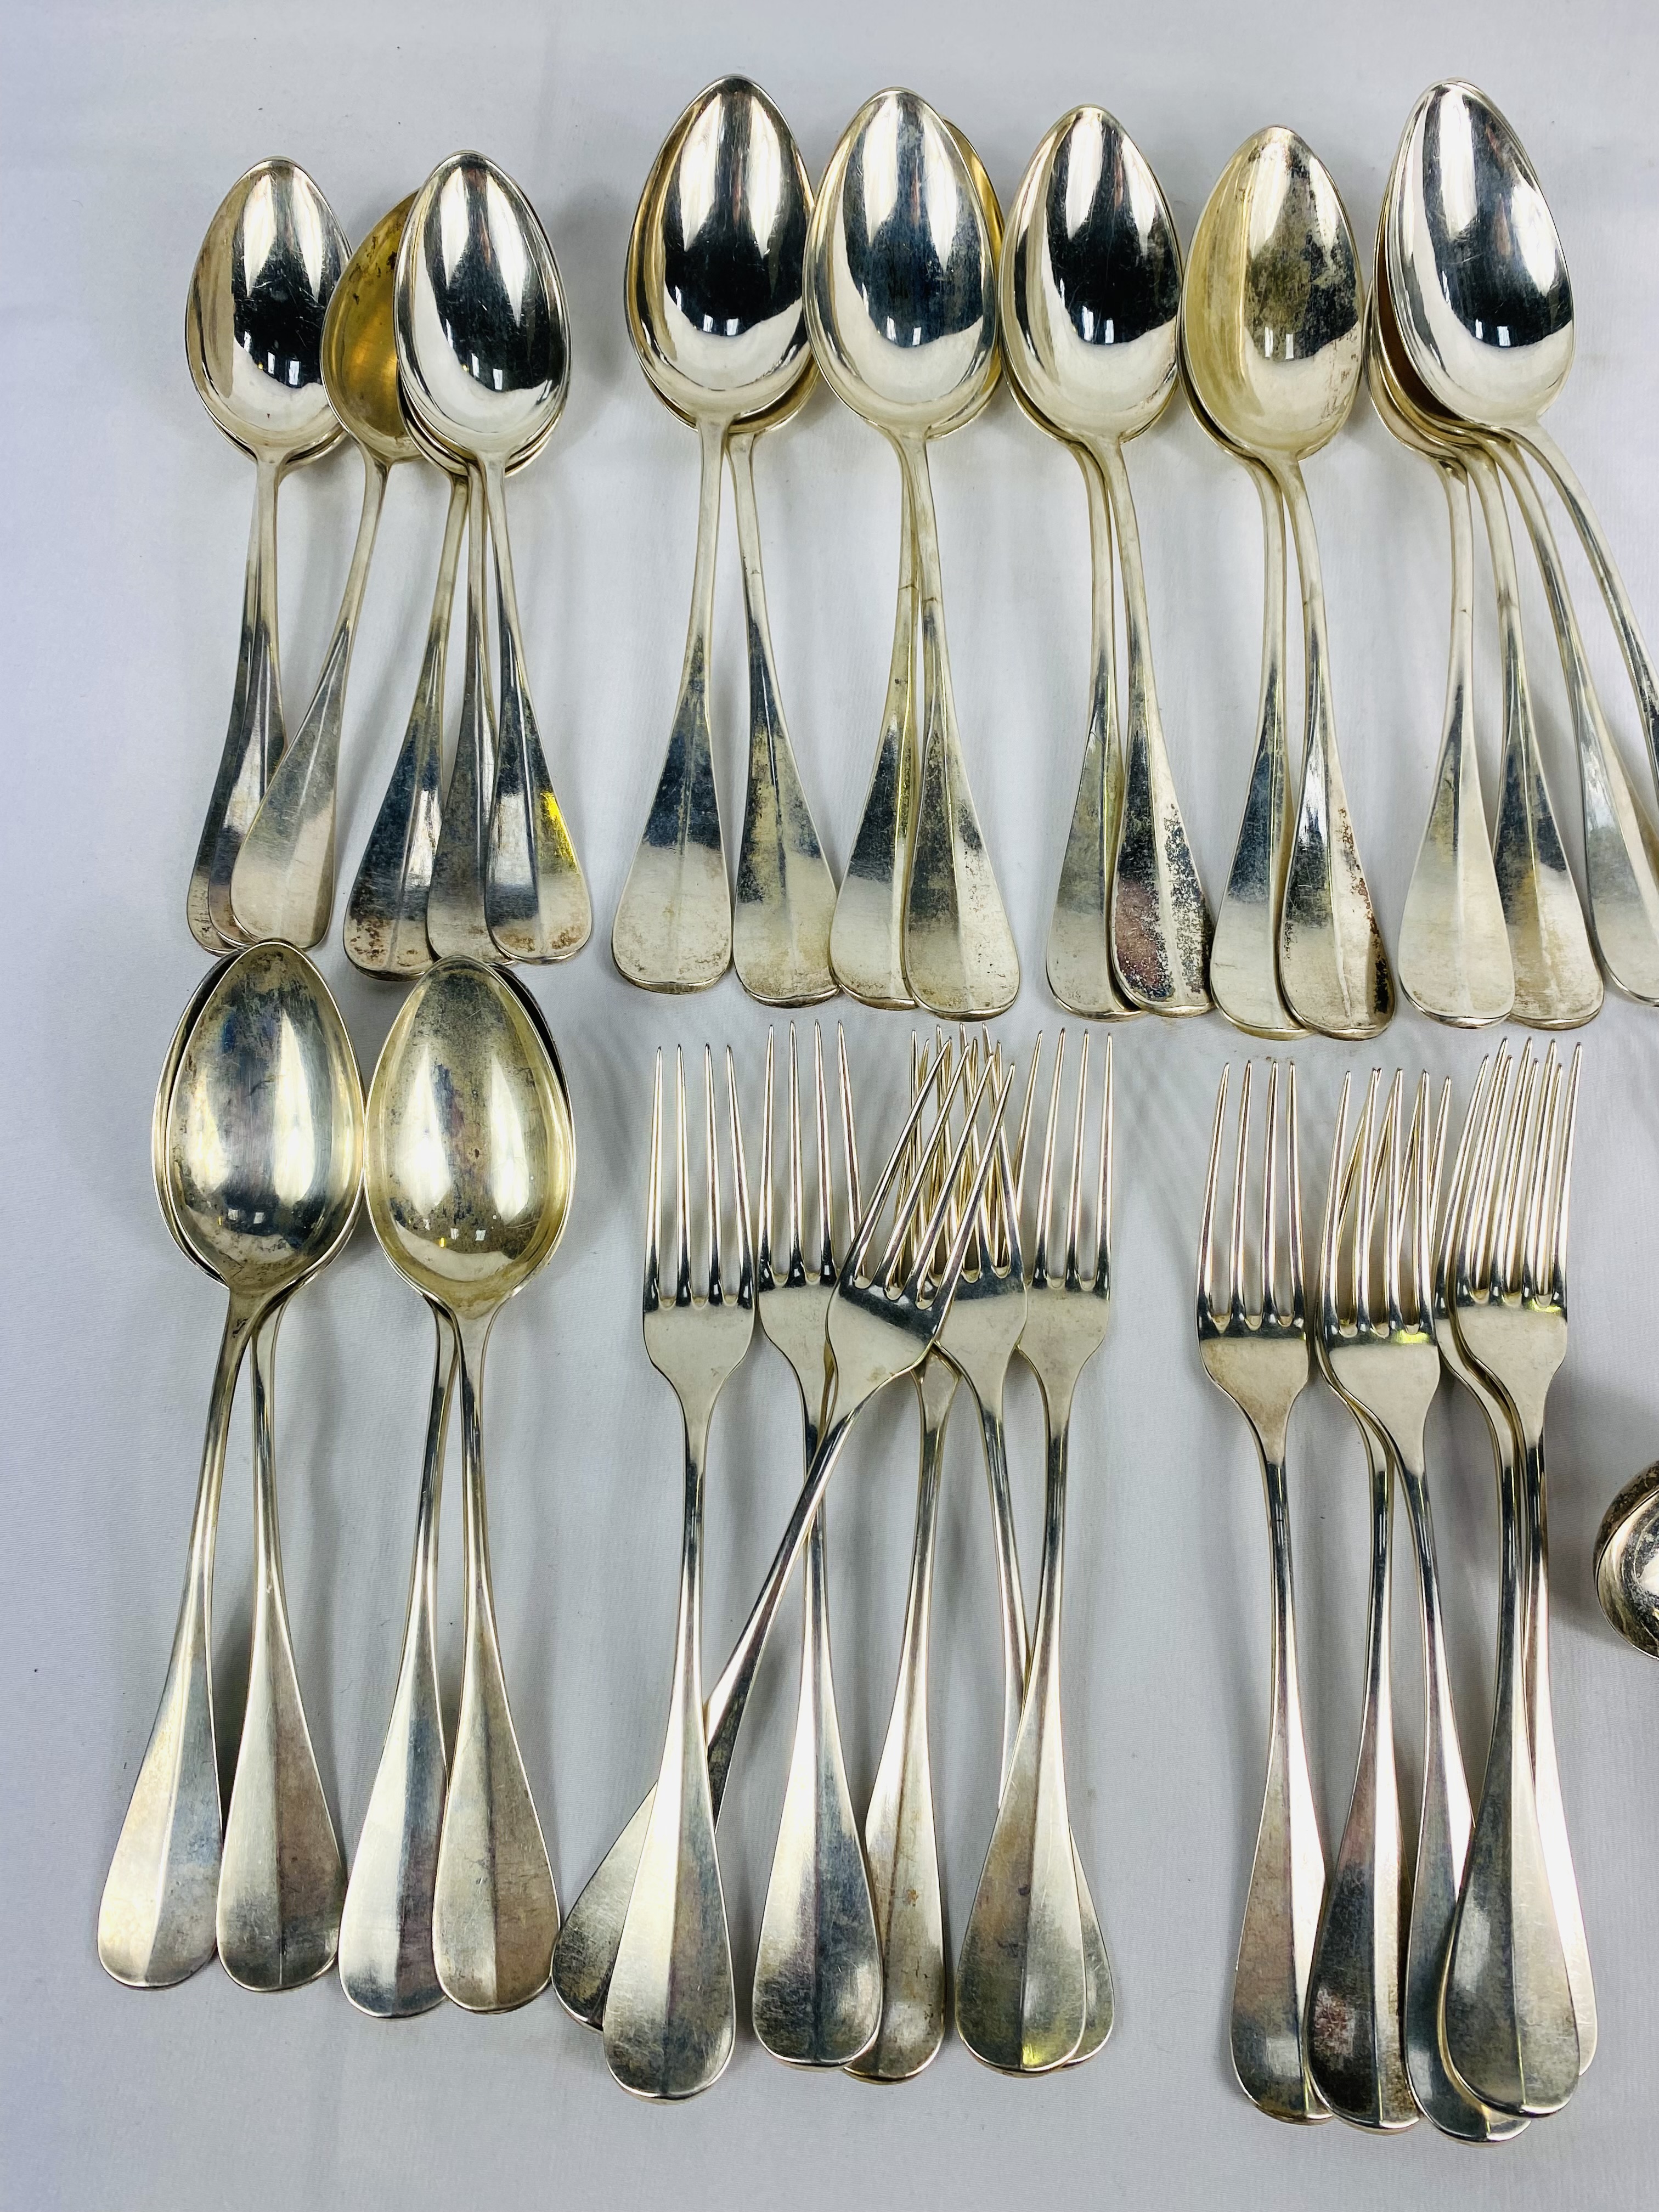 Part set of German 800 silver cutlery, 2488g (80ozt) - Image 3 of 8